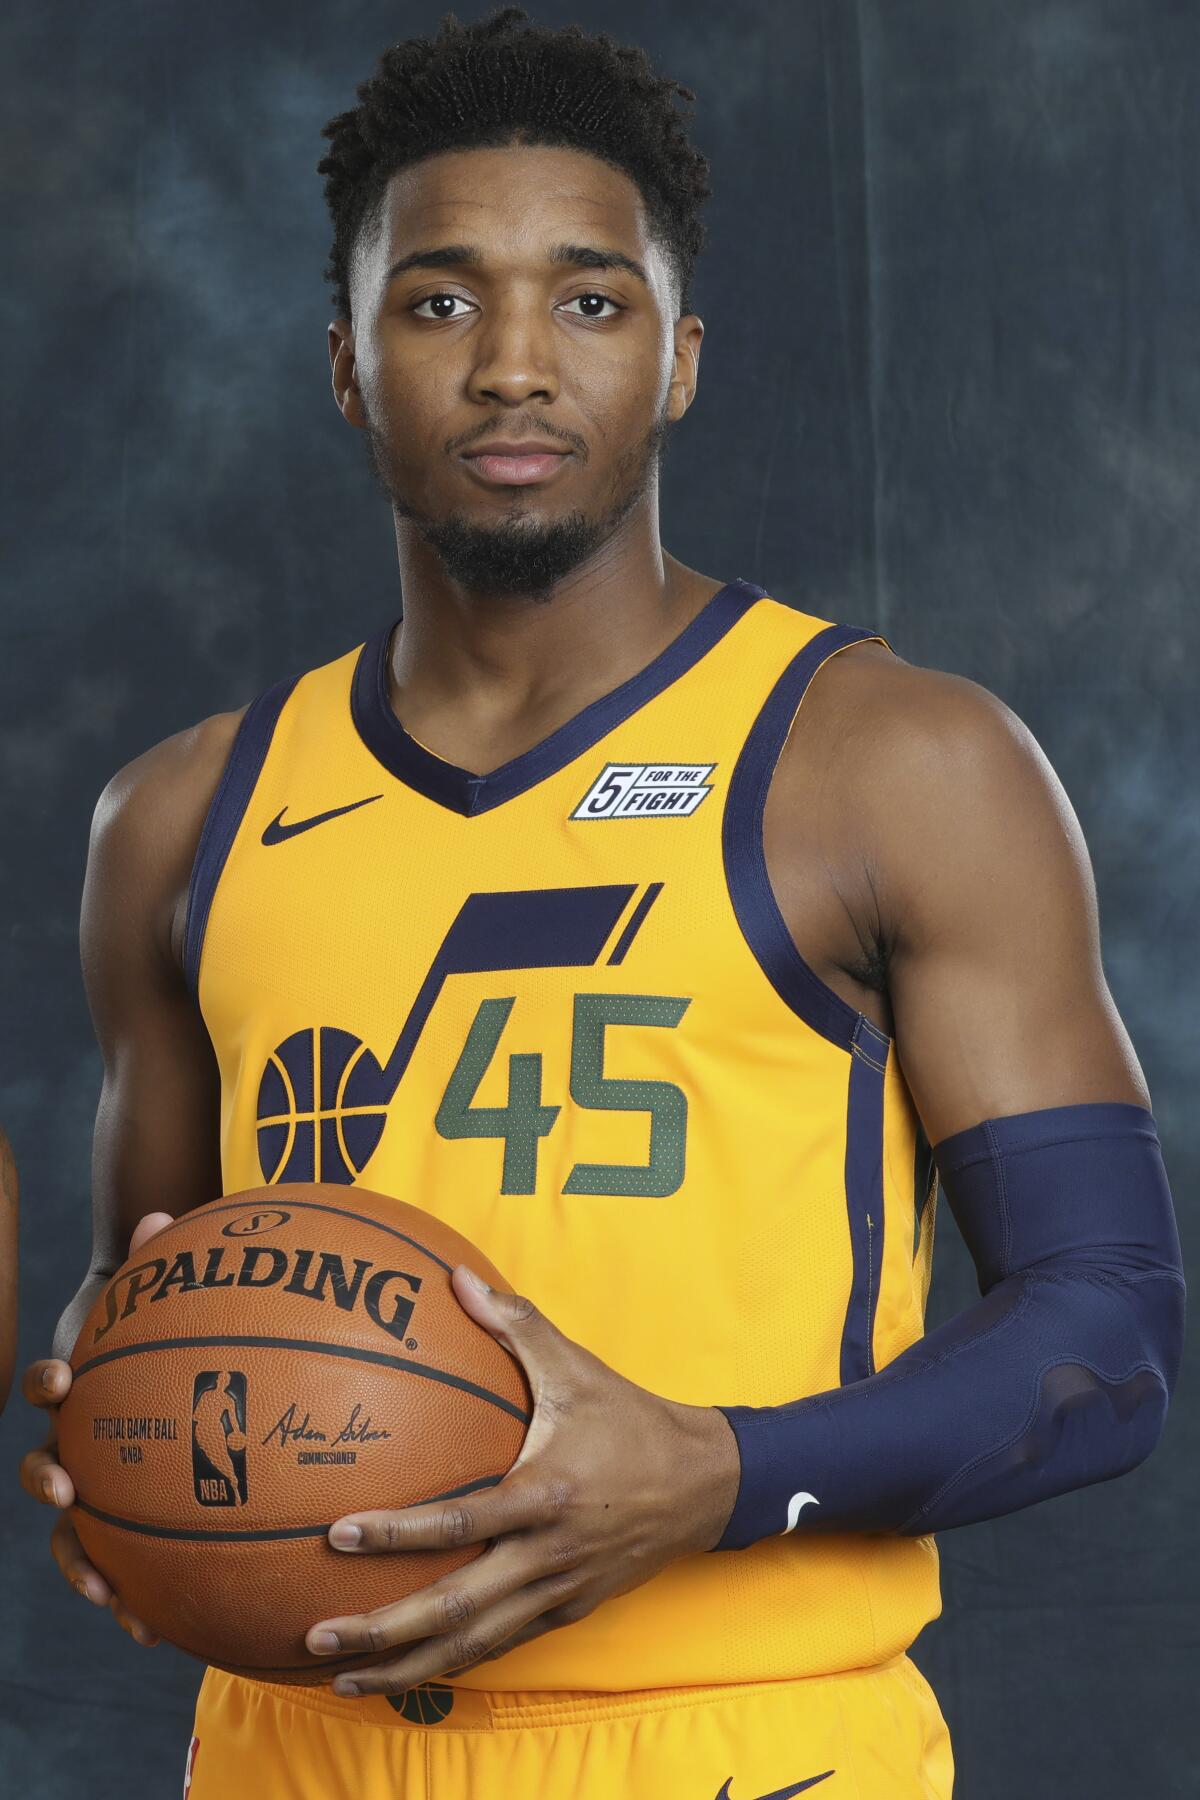 Morning links: The time Donovan Mitchell nearly hit a home run in